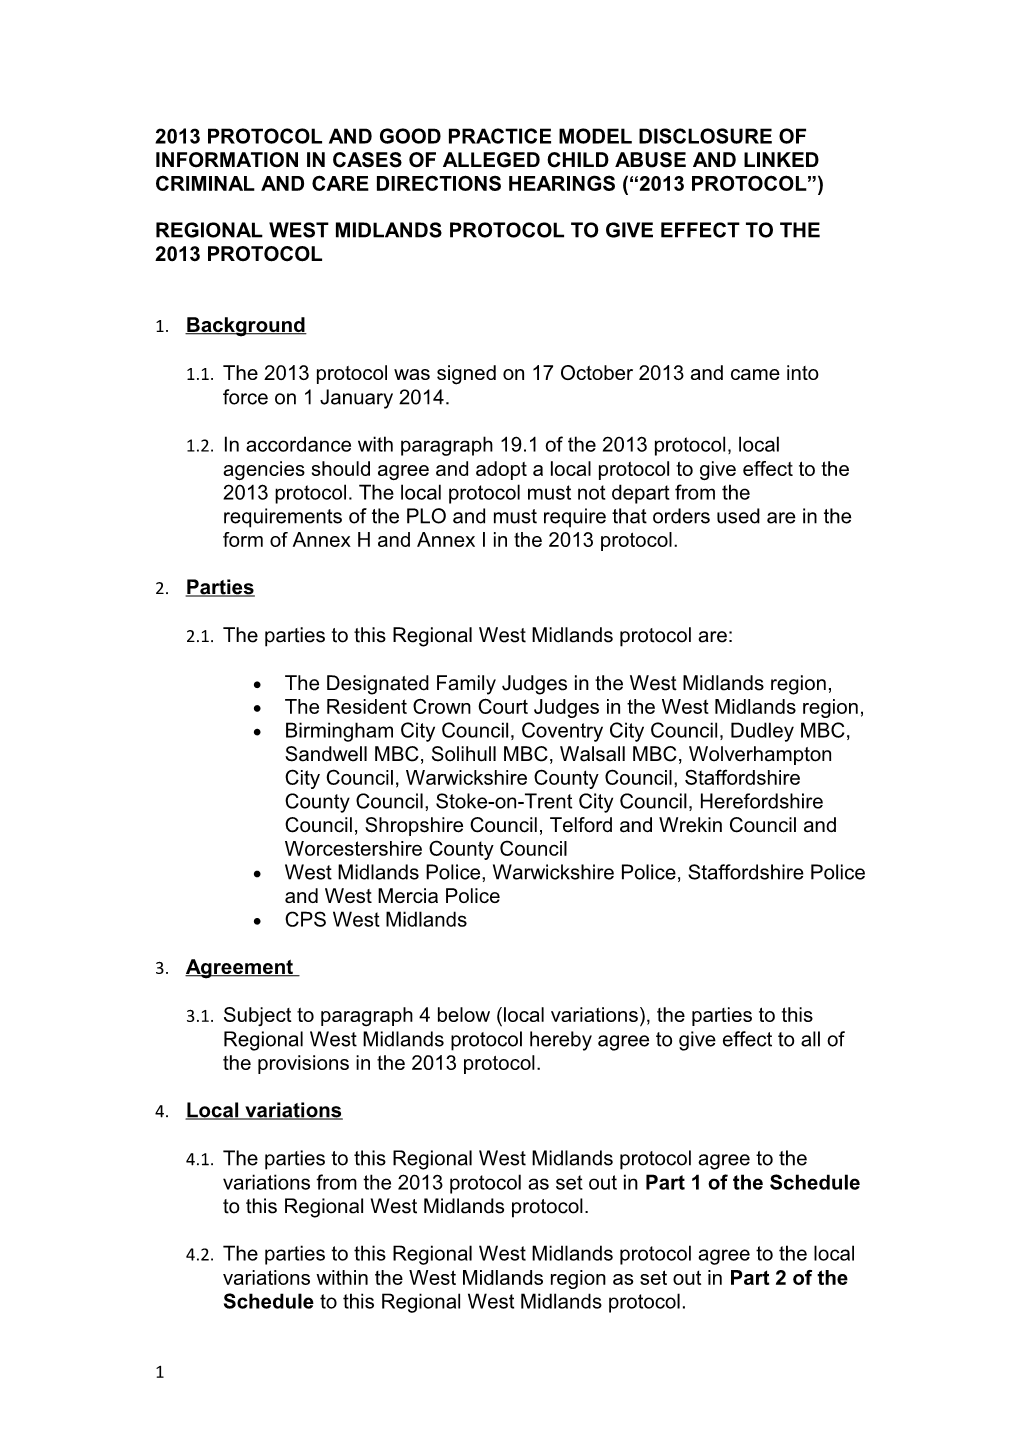 Regional West Midlands Protocol to Give Effect to the 2013 Protocol